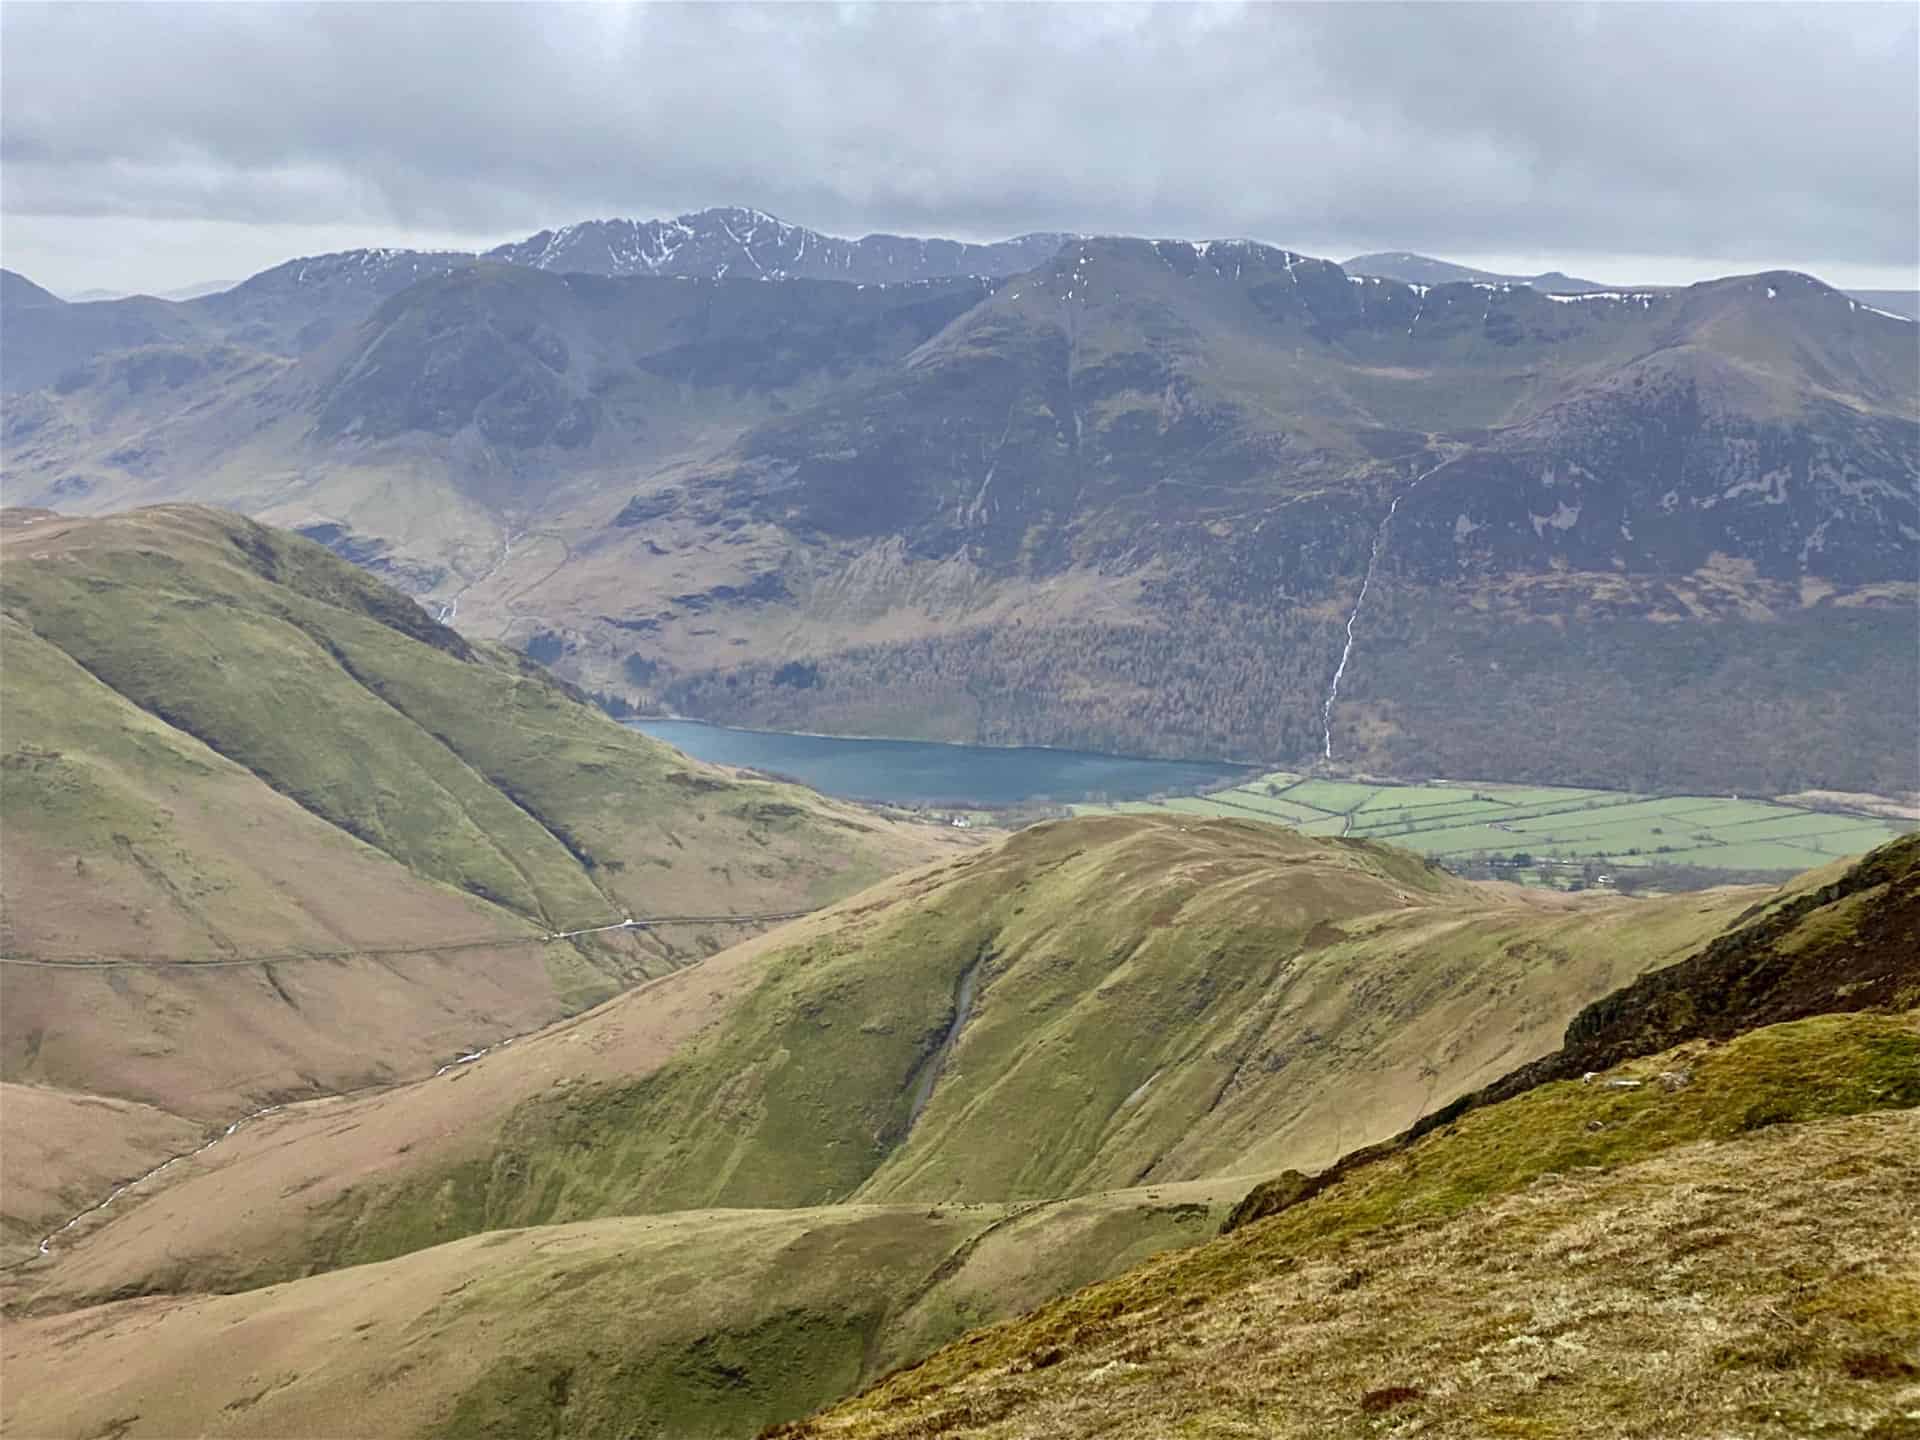 The view south from Wandope. The northern tip of Buttermere is visible in the valley below. The fells behind the lake include Red Pike, High Stile and High Crag.